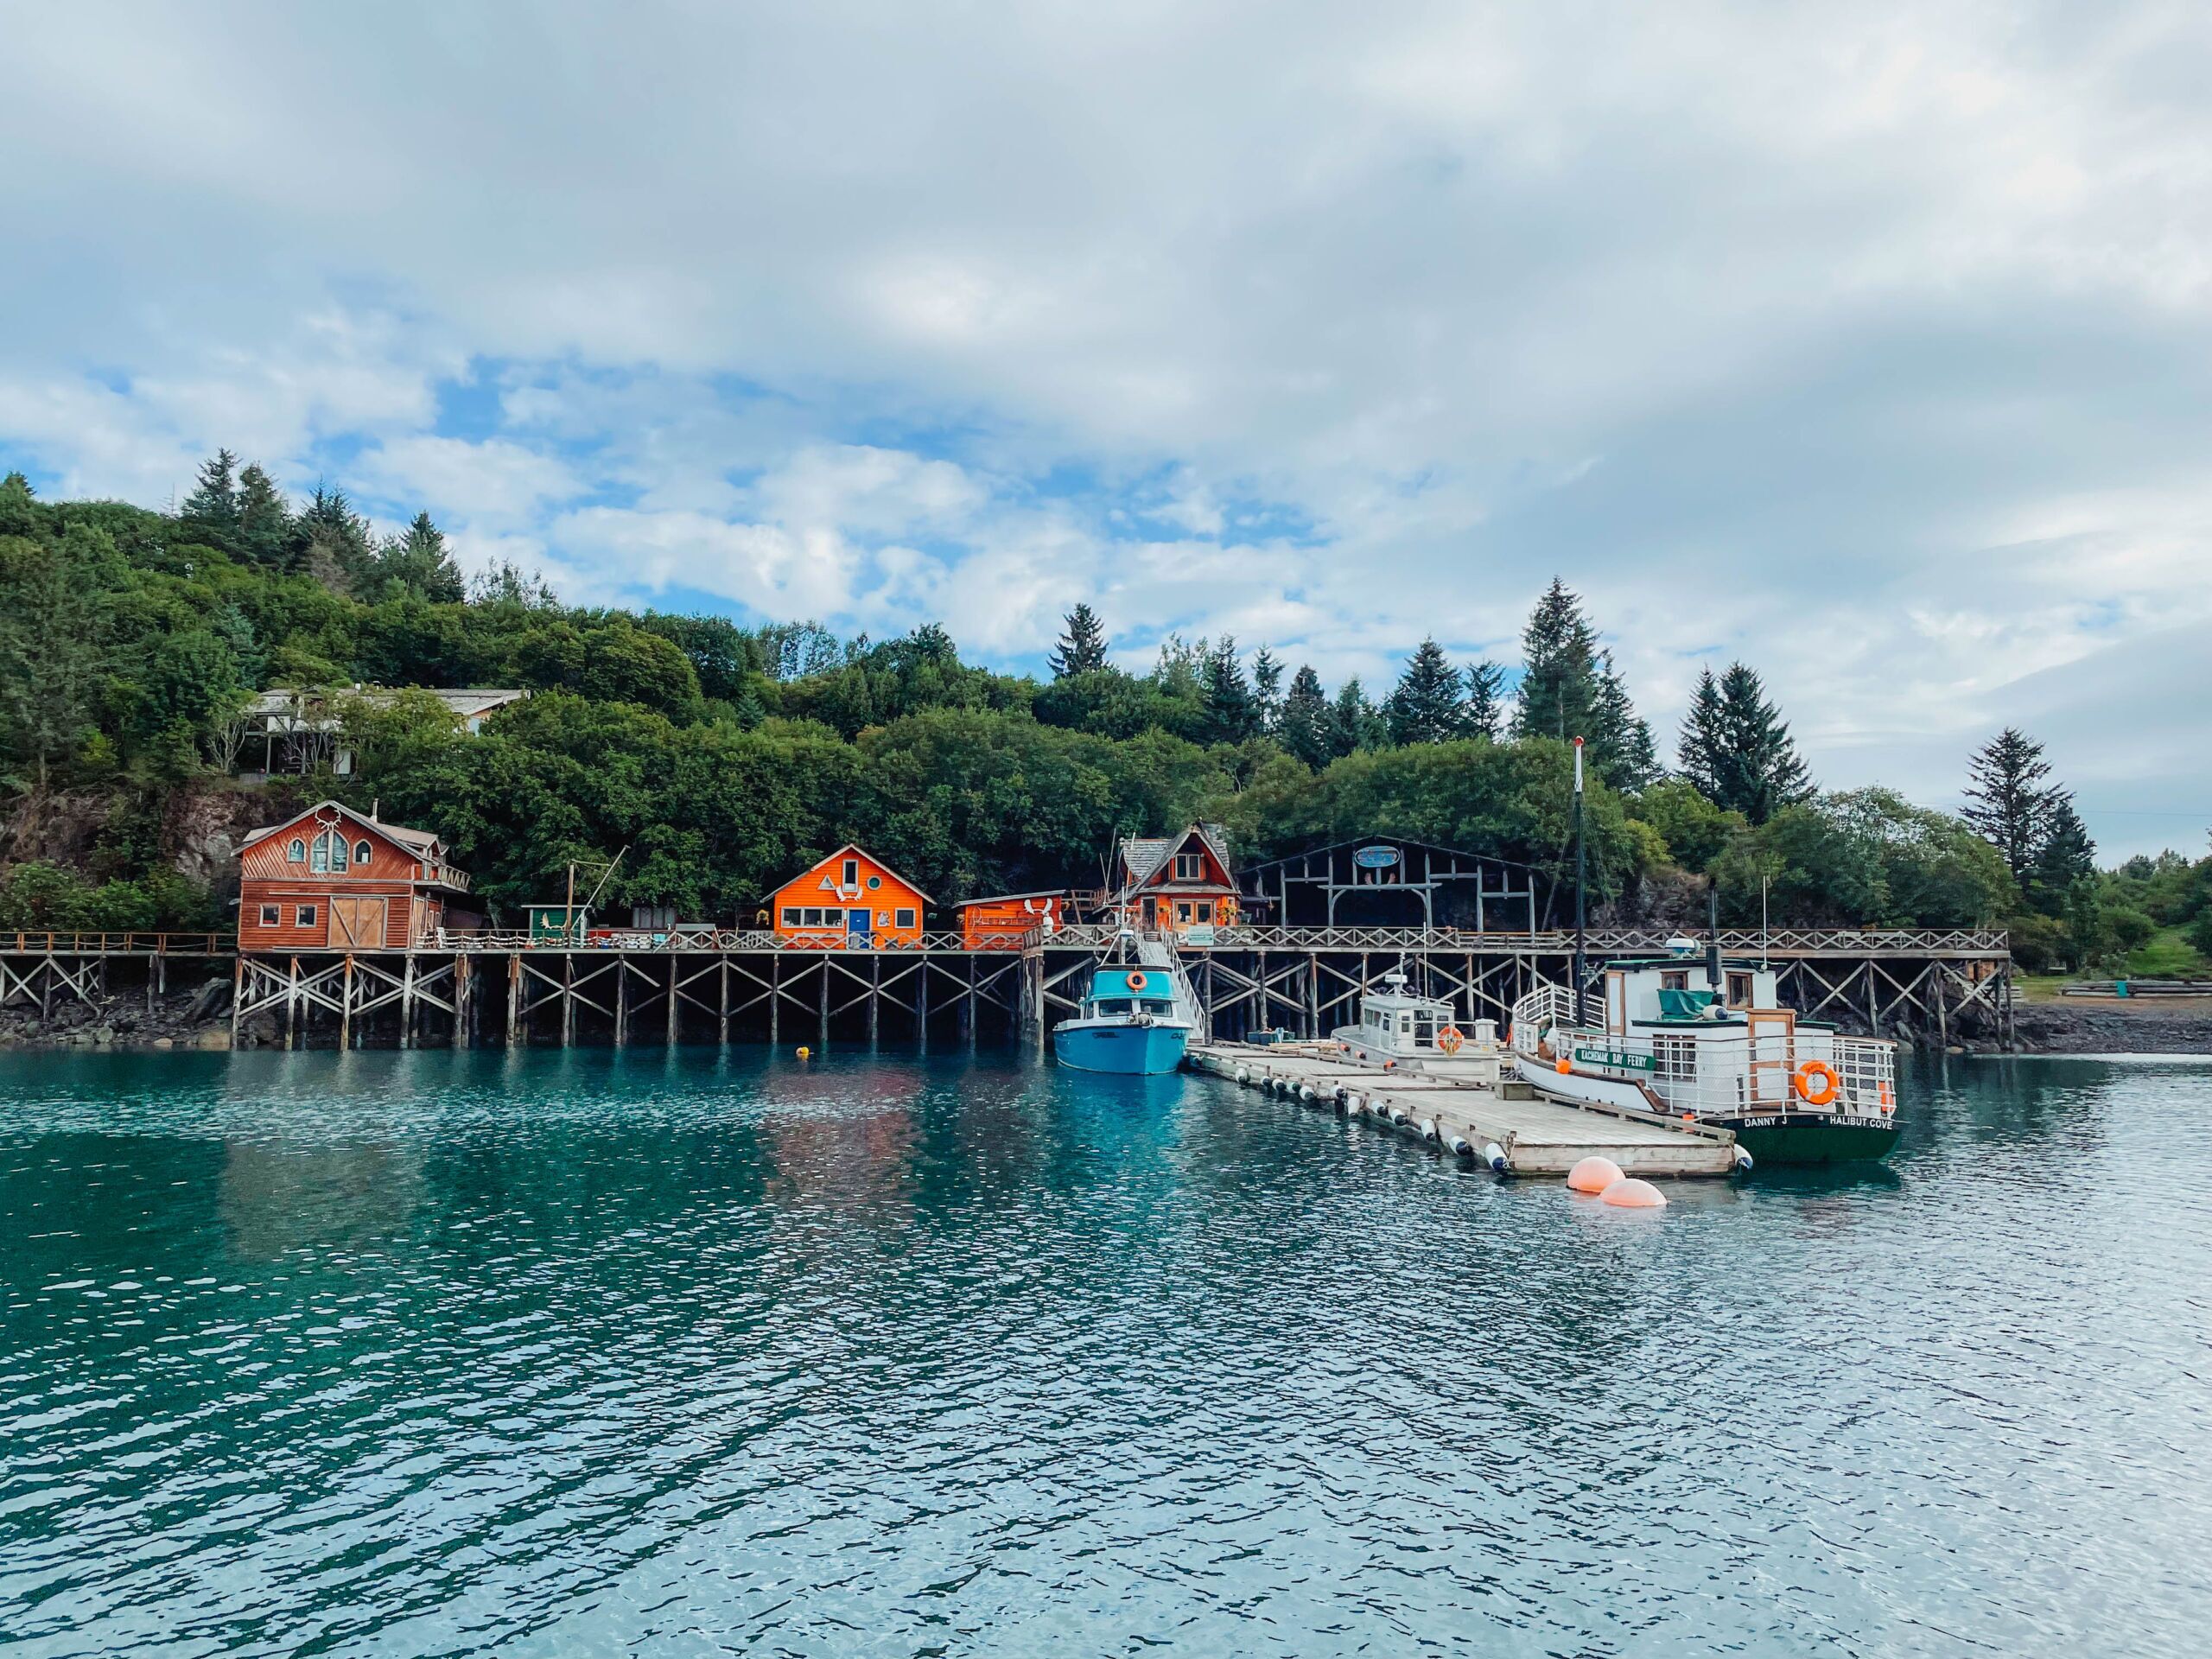 Colorful buildings in Halibut Cove, one of the cutest places to visit on an Alaska honeymoon